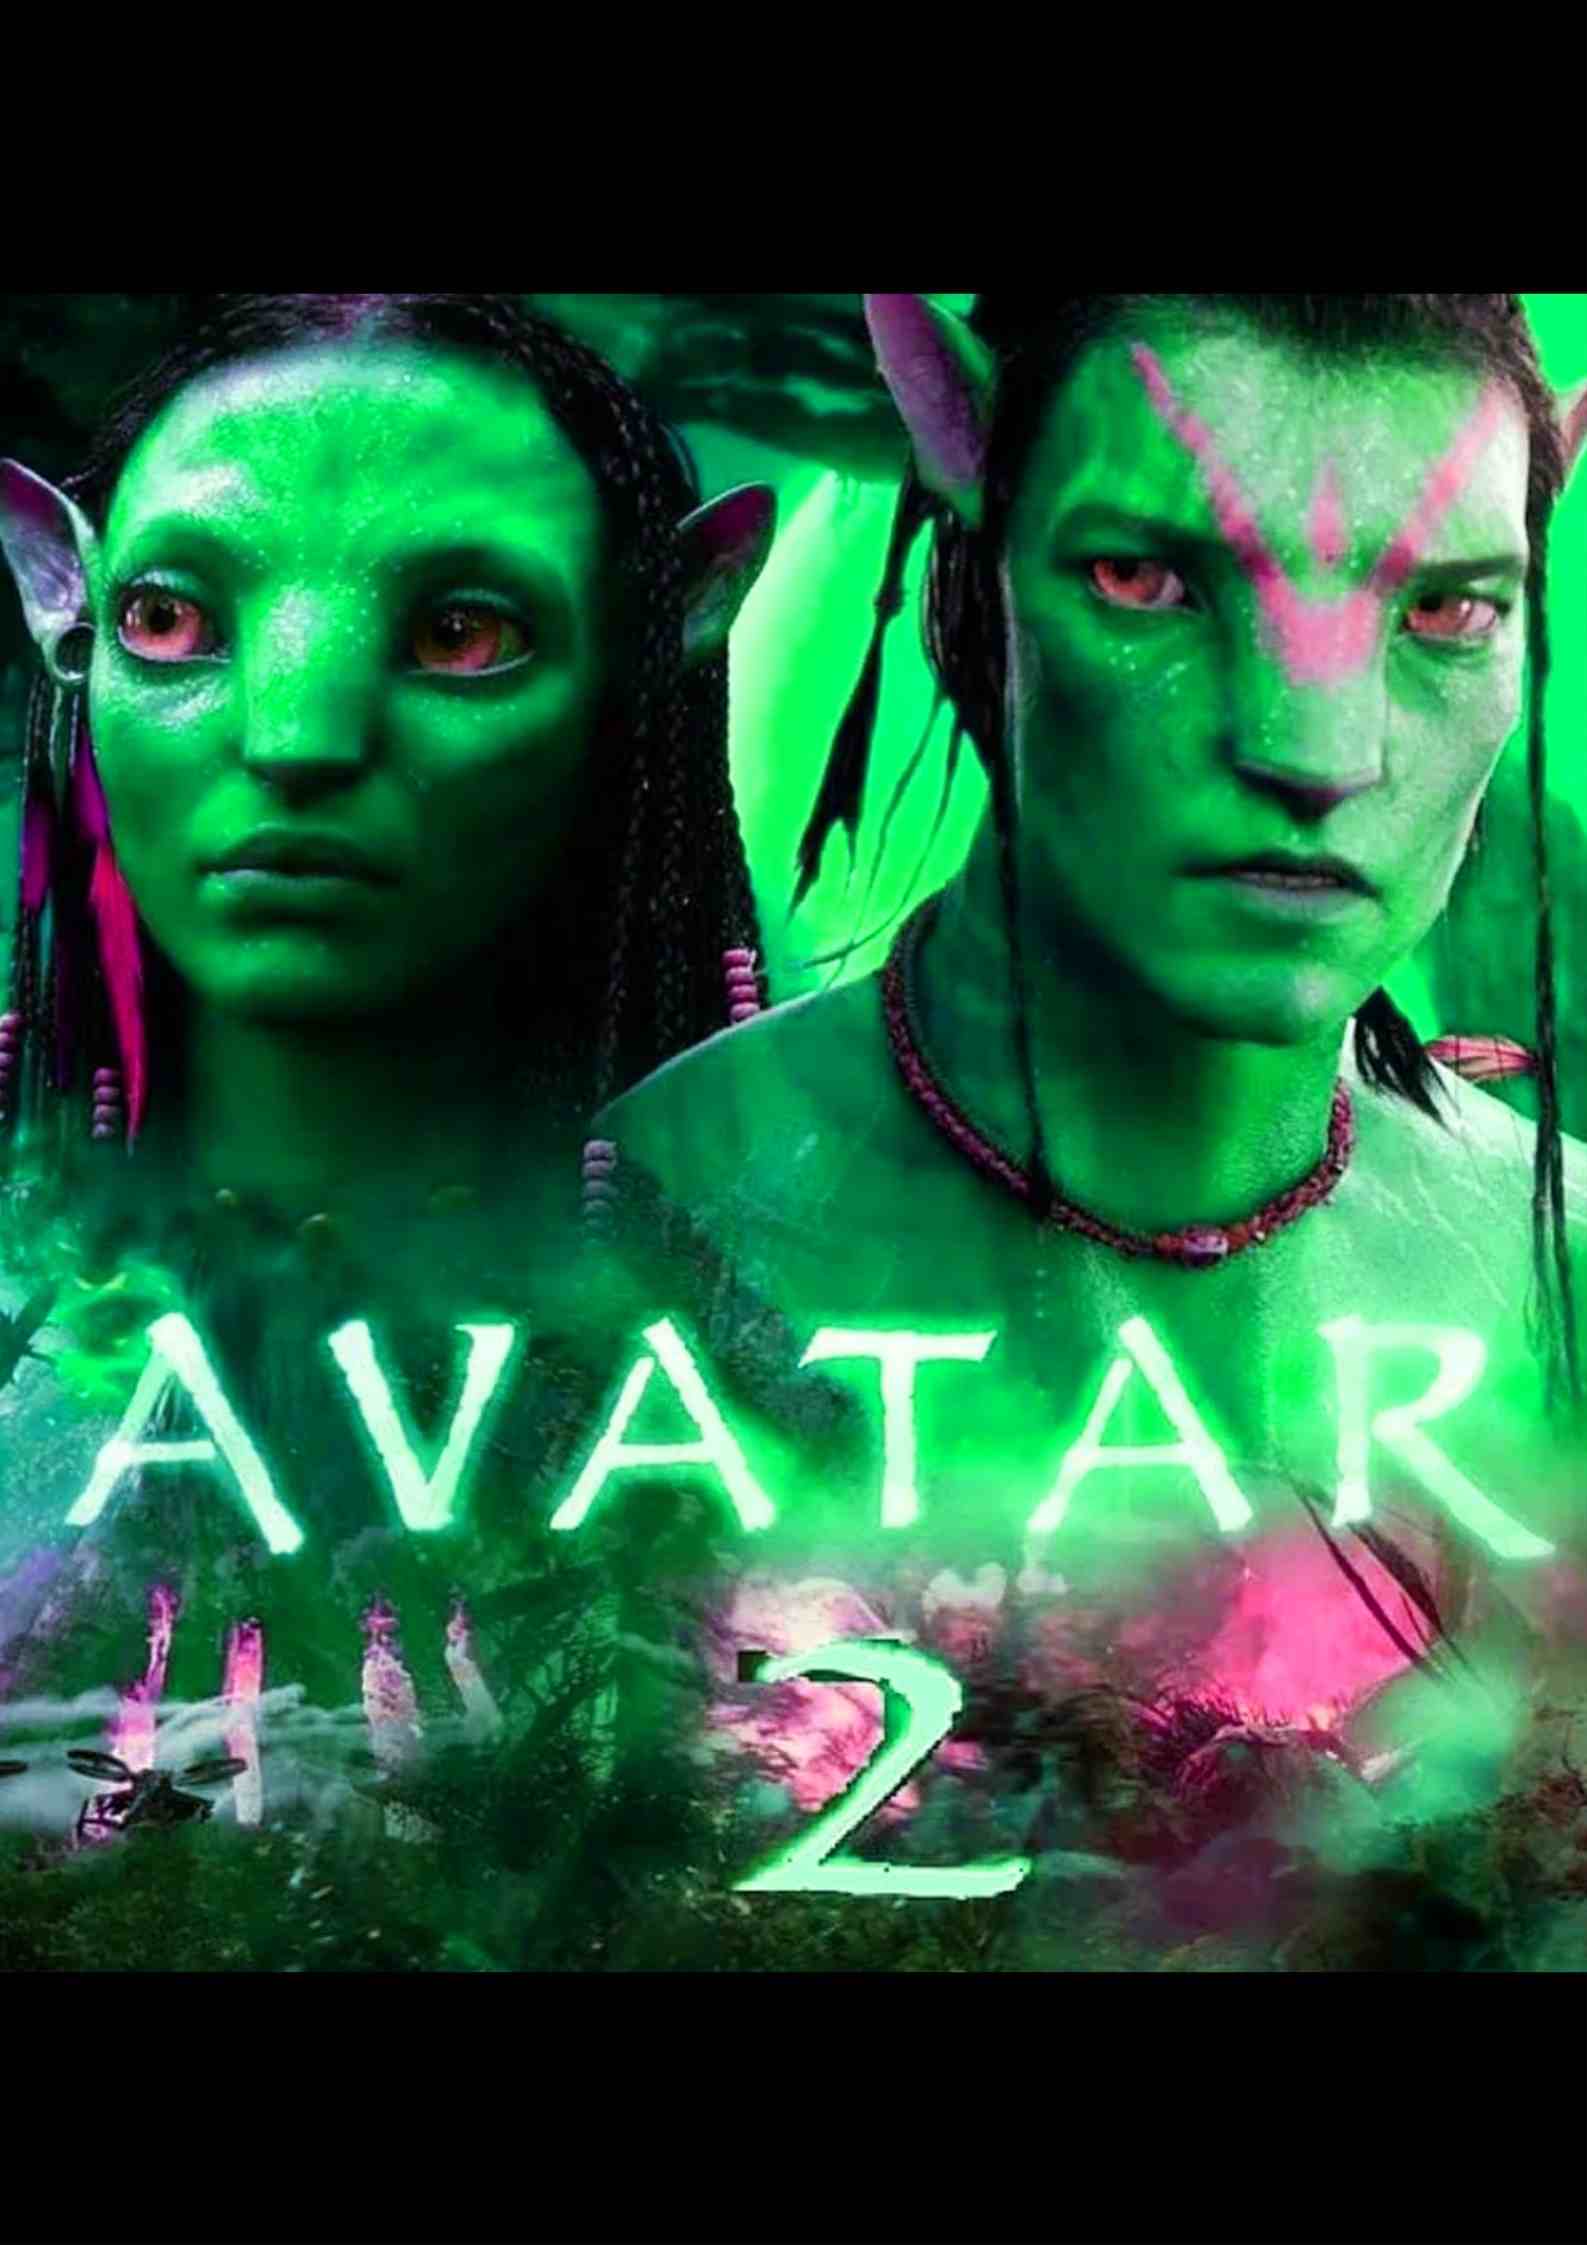 Avatar 2 Parents Guide. Avatar: The Way of Water Age Rating